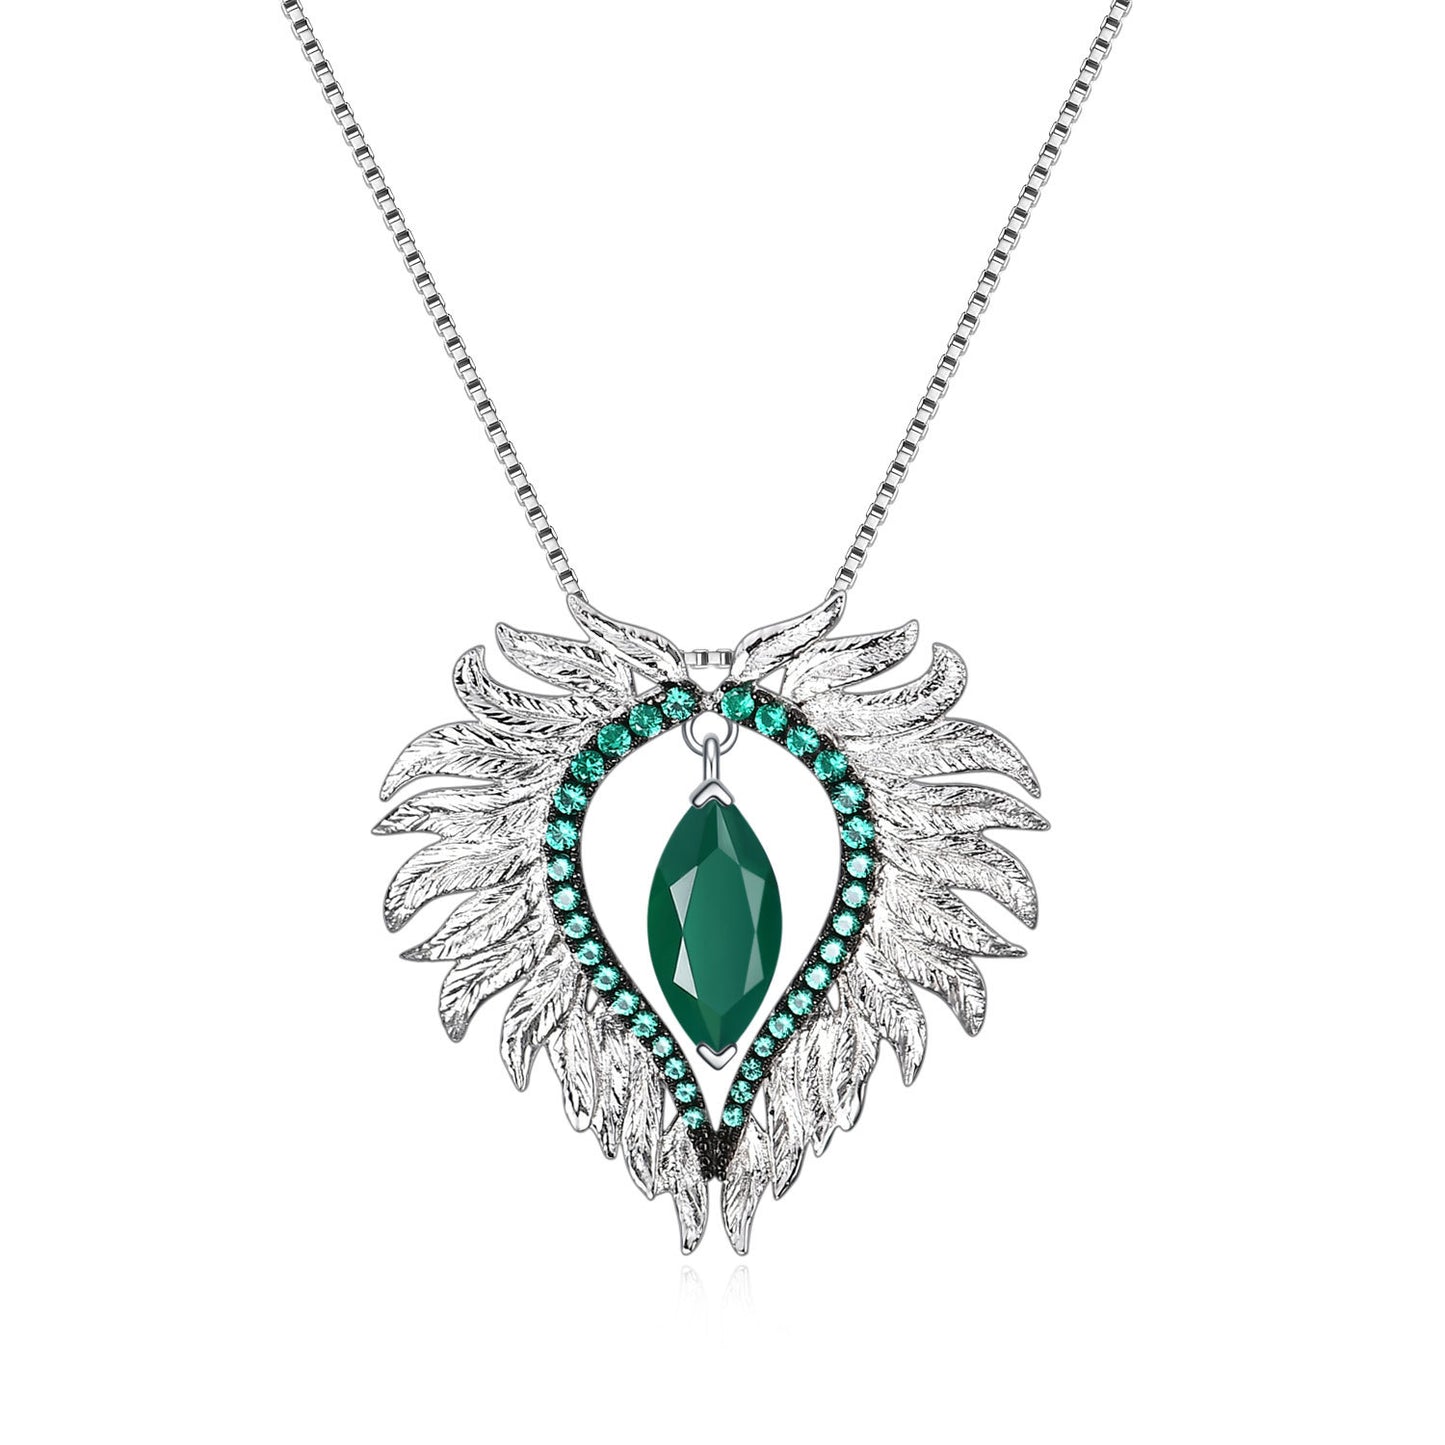 Luxury Design Inlaid Natural Colorful Gemstone Angel Wings Pendant Silver Necklace for Women